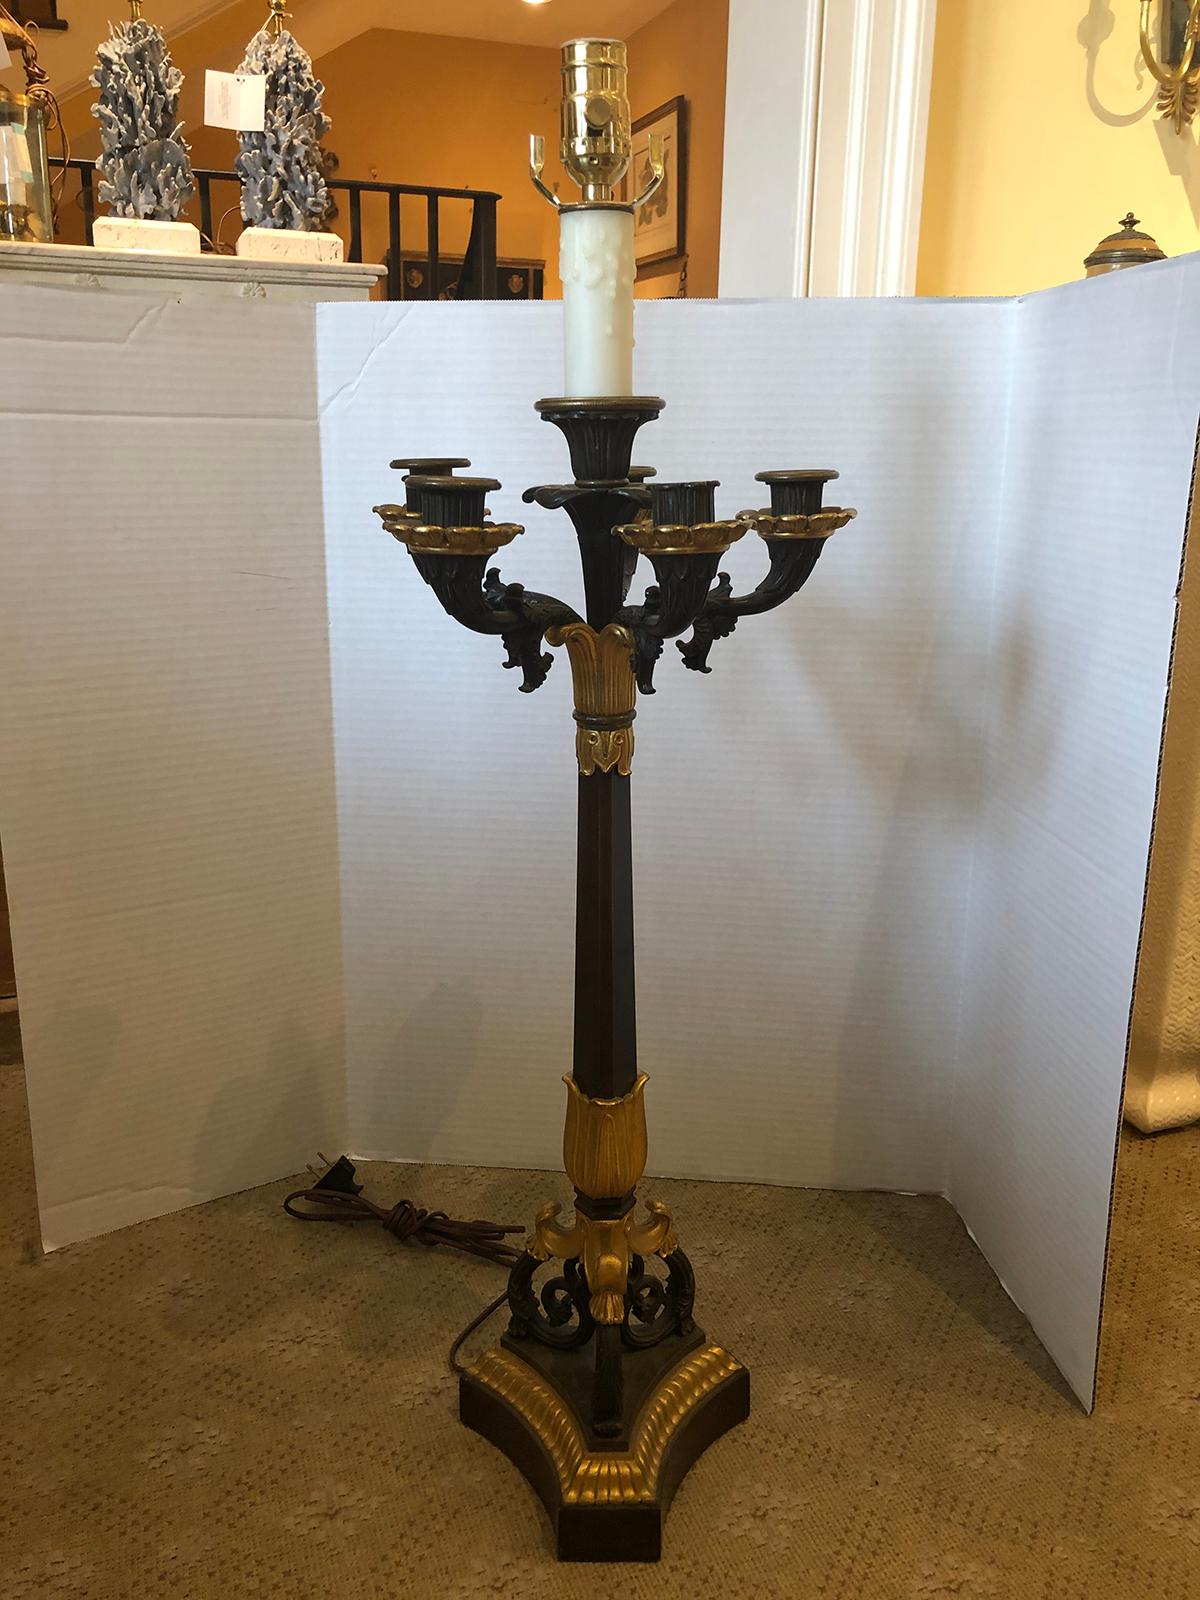 19th century Empire style bronze five-arm candelabra as lamp
New wiring.